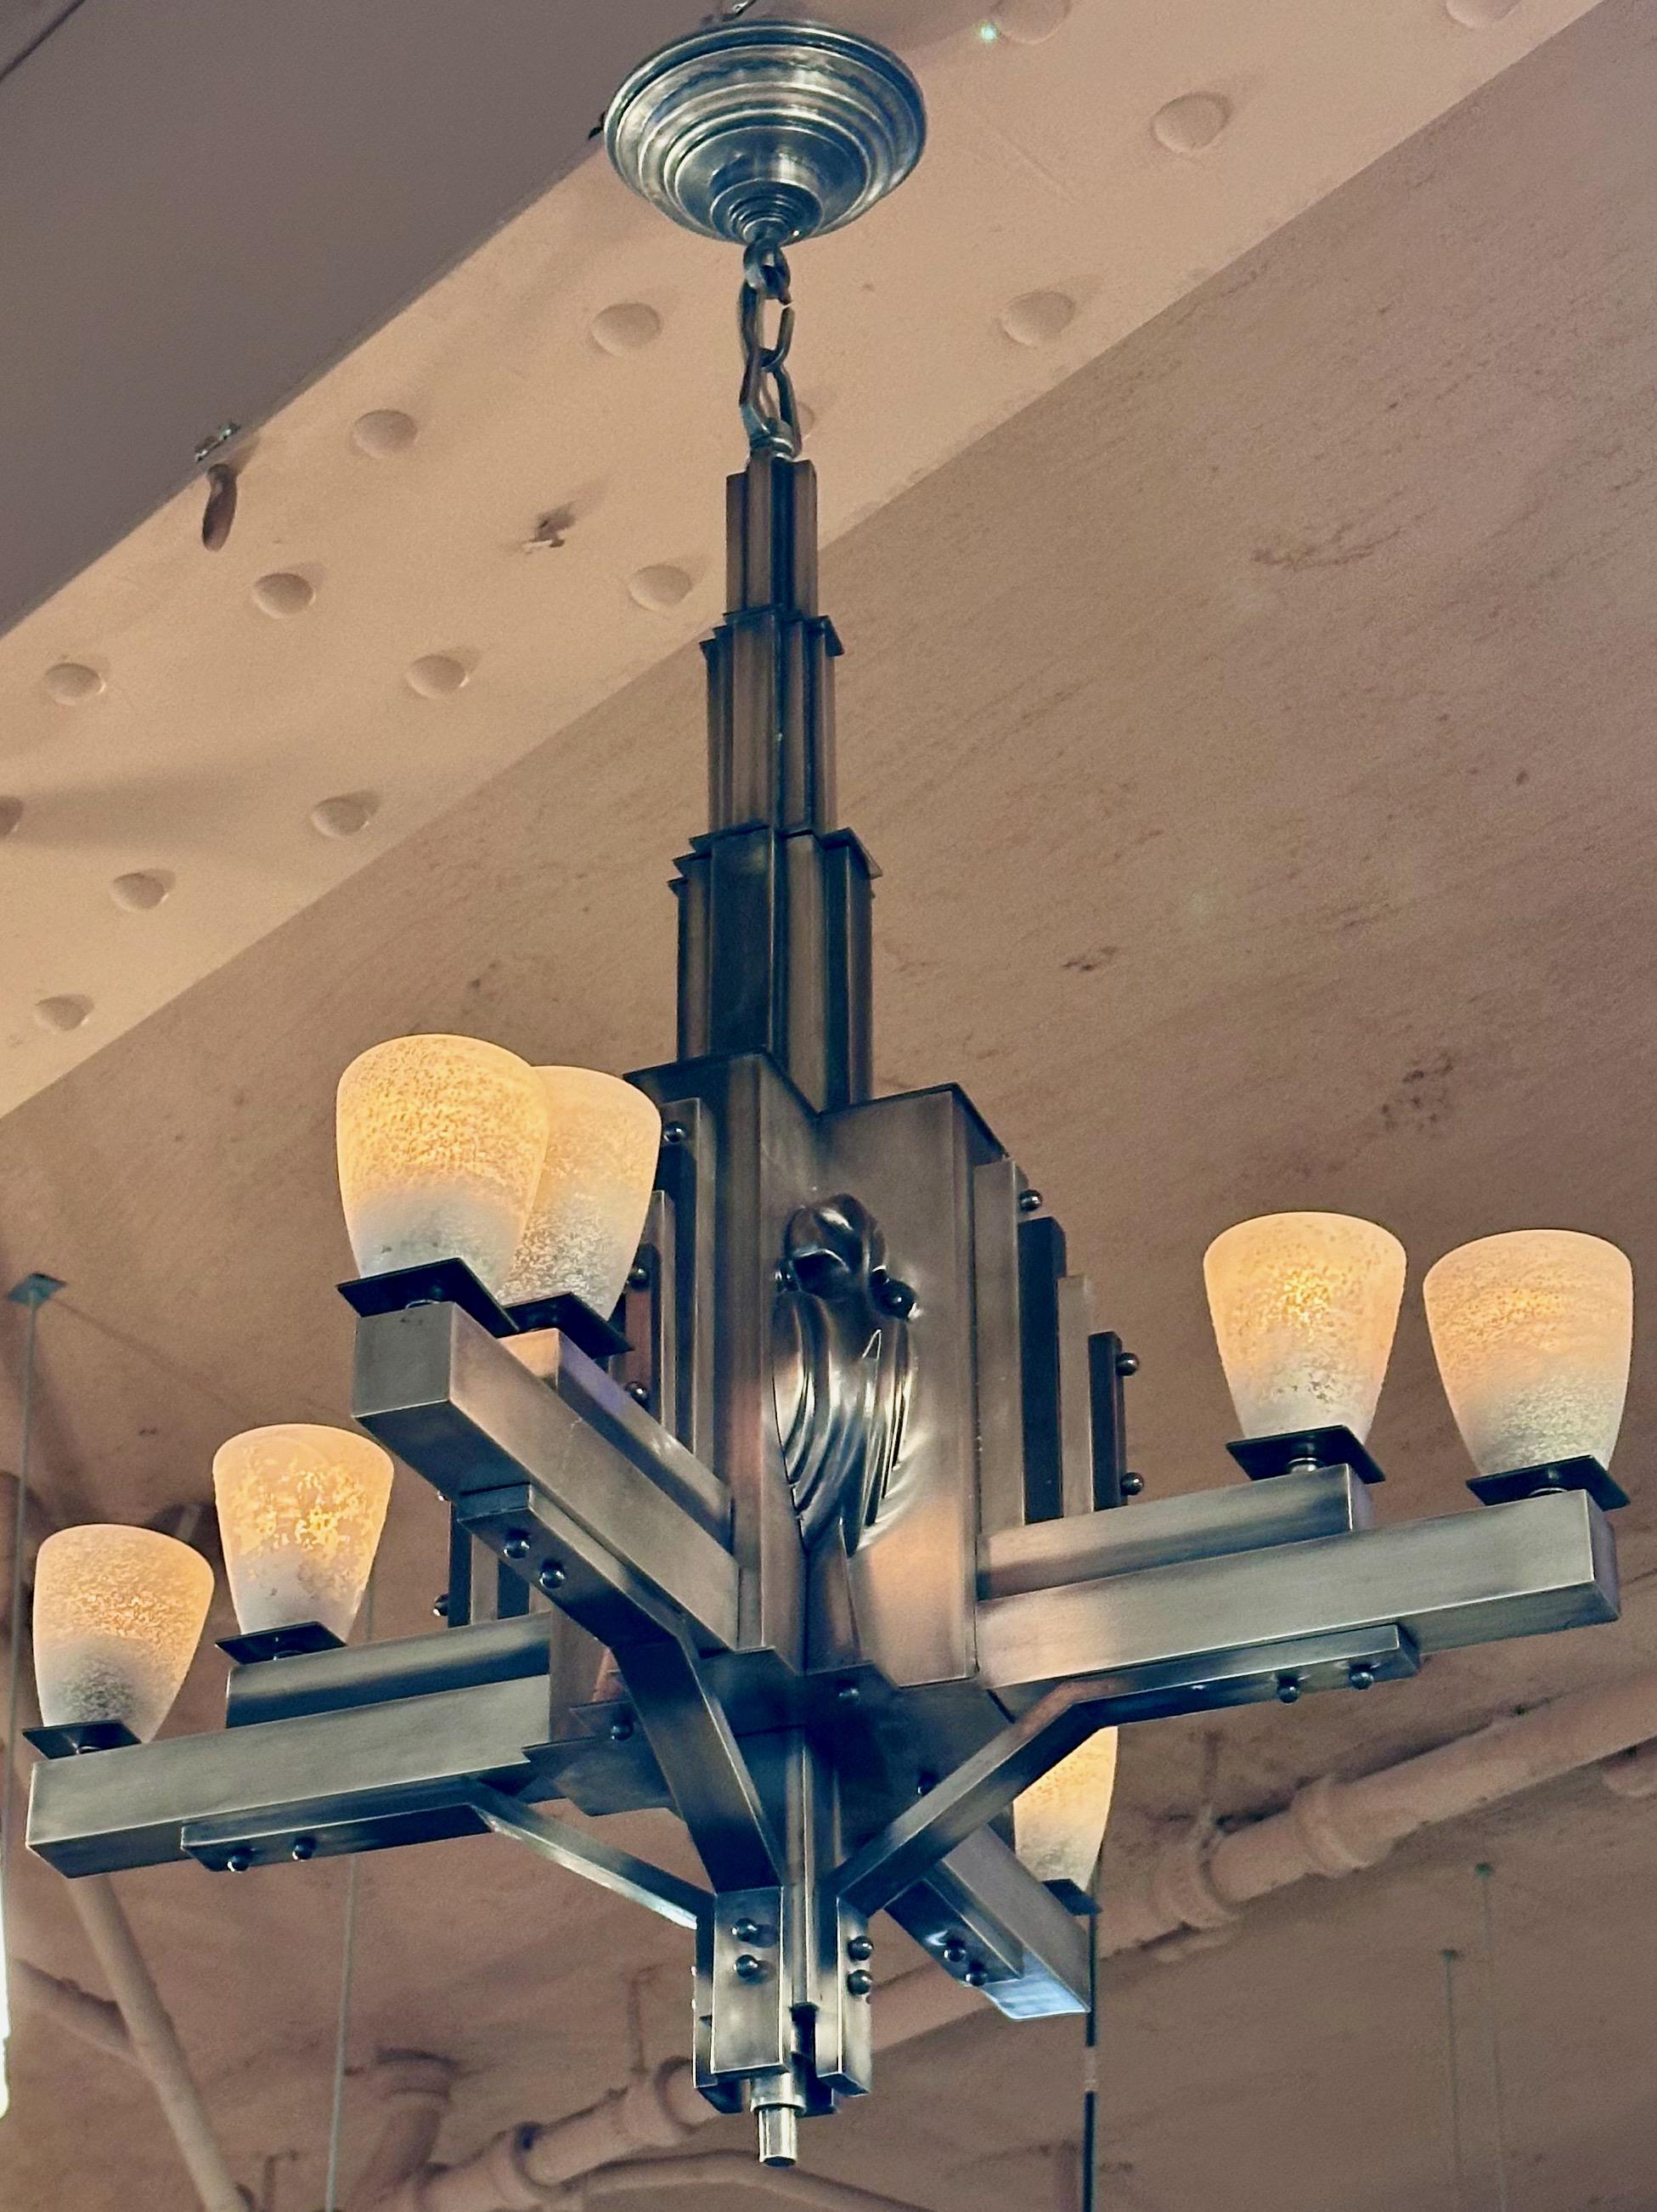 French Art Deco Chandelier Antique Nickel Modernist rare chandelier featuring a Marabou stork motif. Art Deco design is known for its geometric shapes, and luxurious materials, and this light has a particular modernist and cubist style. There are 4